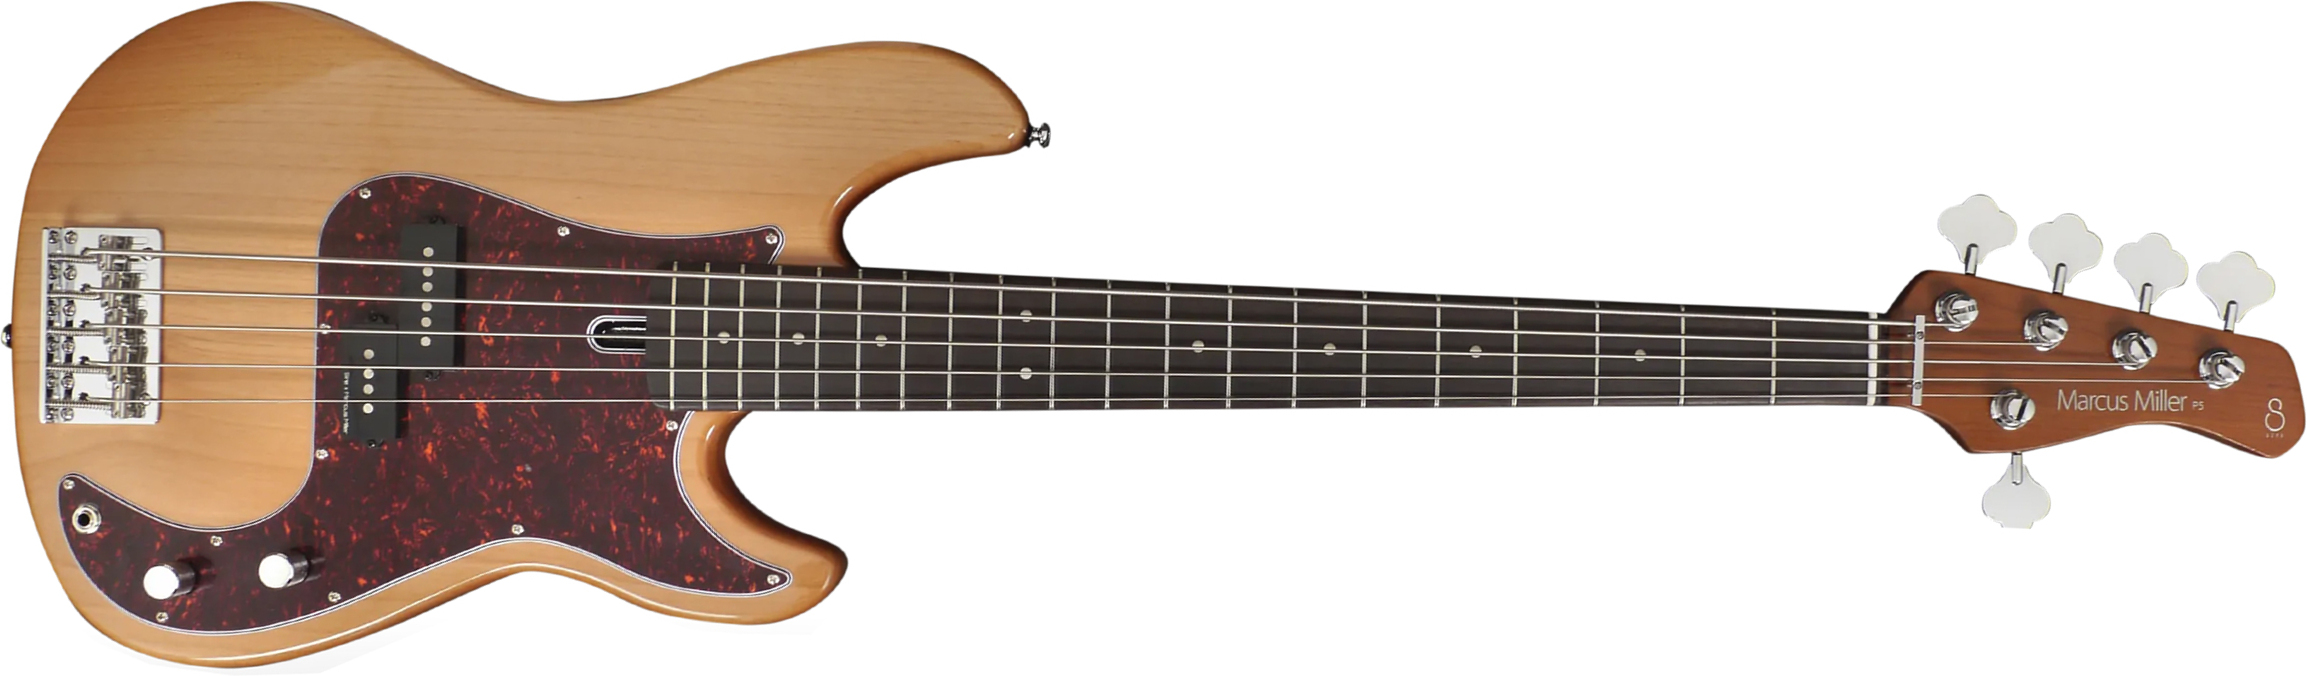 Marcus Miller P5r 5st 5c Rw - Natural - Solidbody E-bass - Main picture